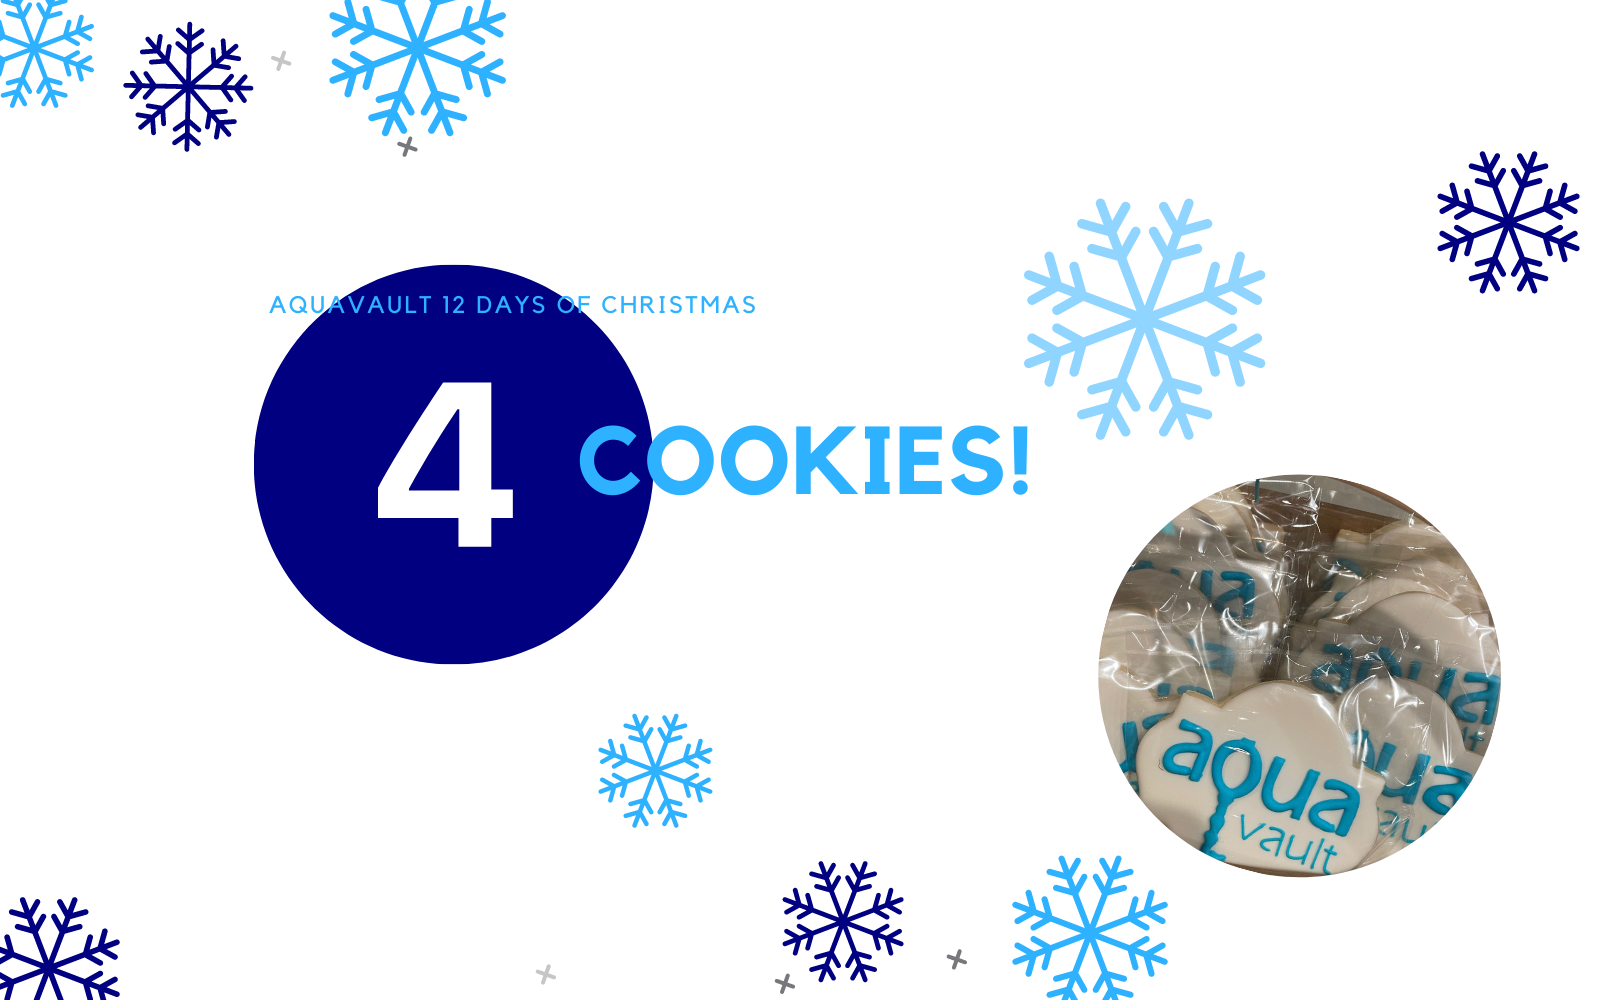 AquaVault 12 Days of Christmas - Day 4 : Cookies!